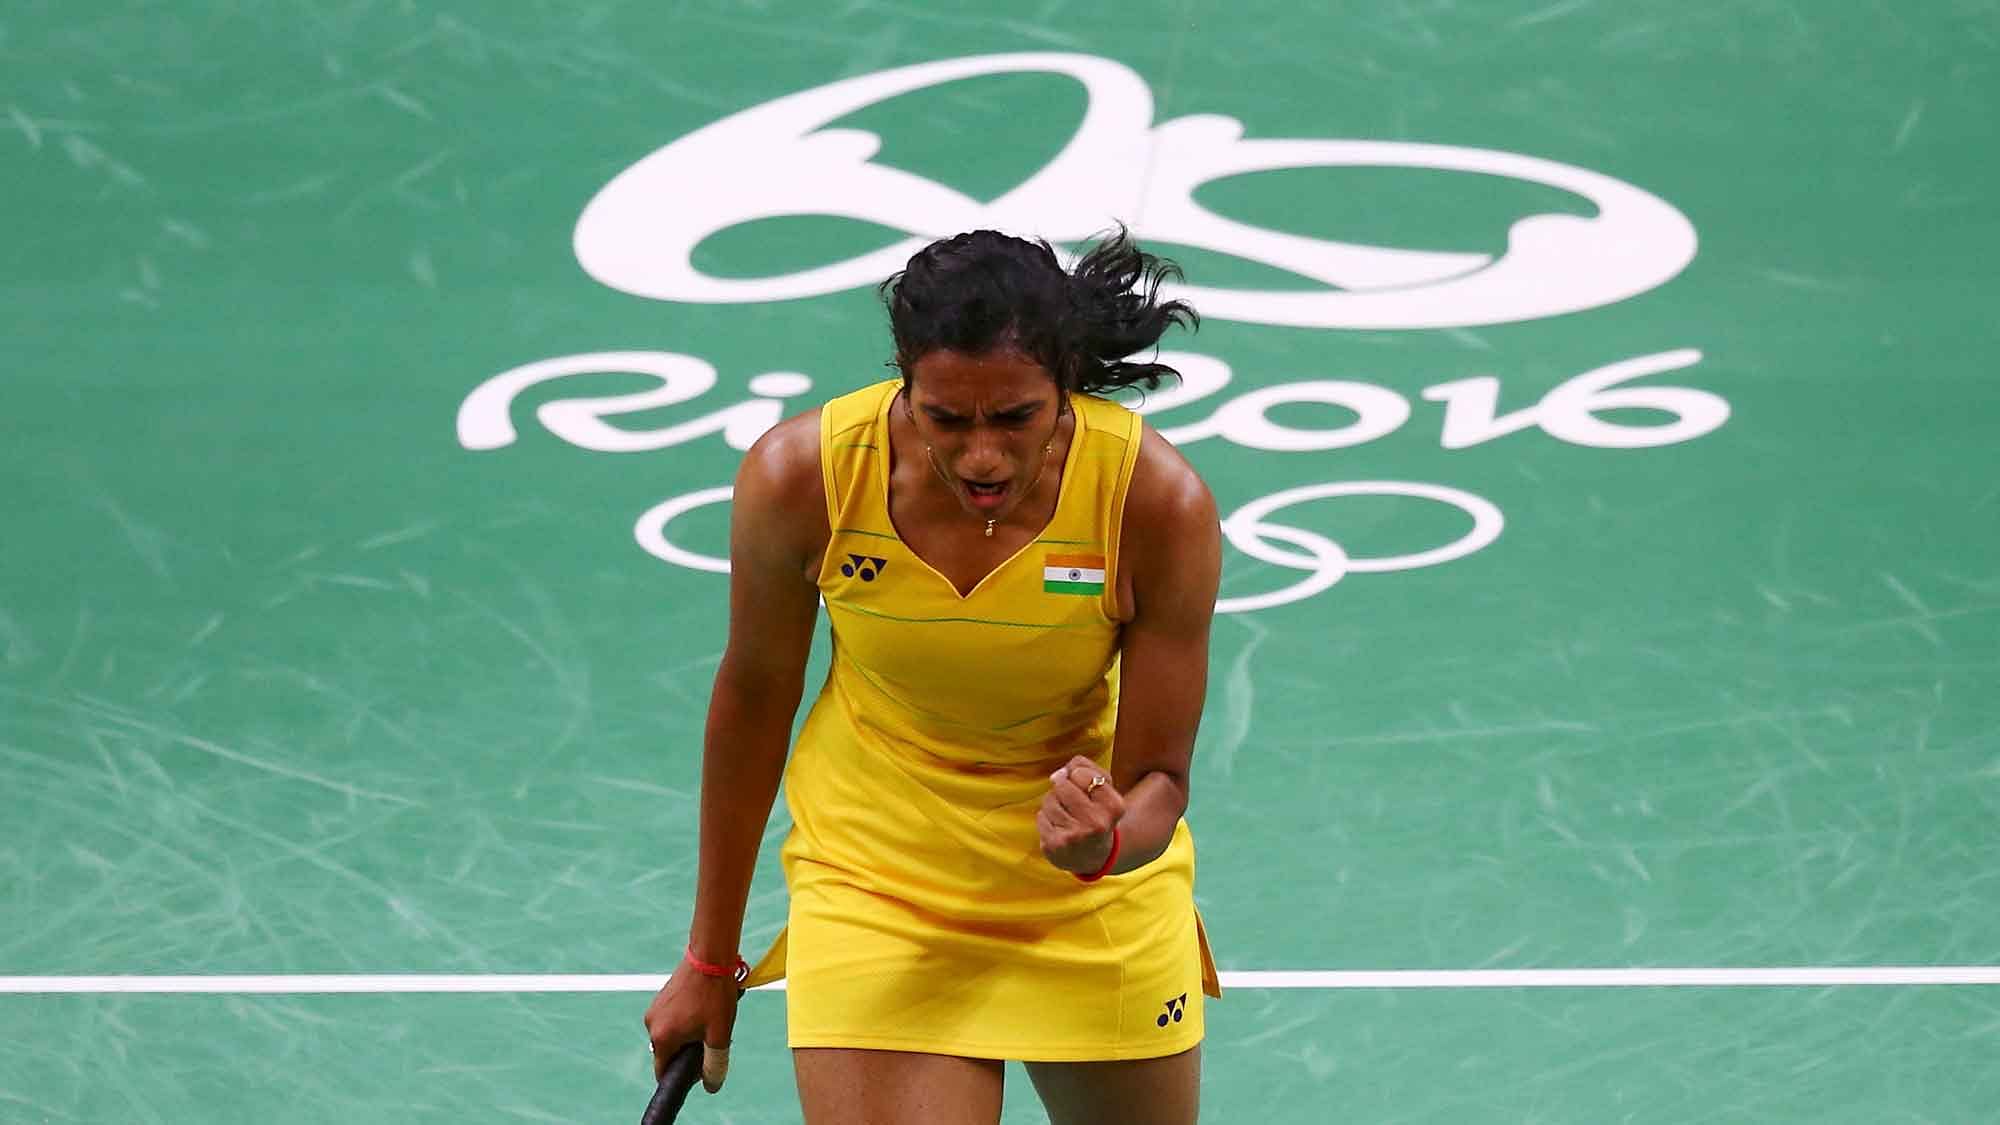 PV Sindhu in action during her women’s singles semifinal at the Rio Olympics. (Photo: AP)